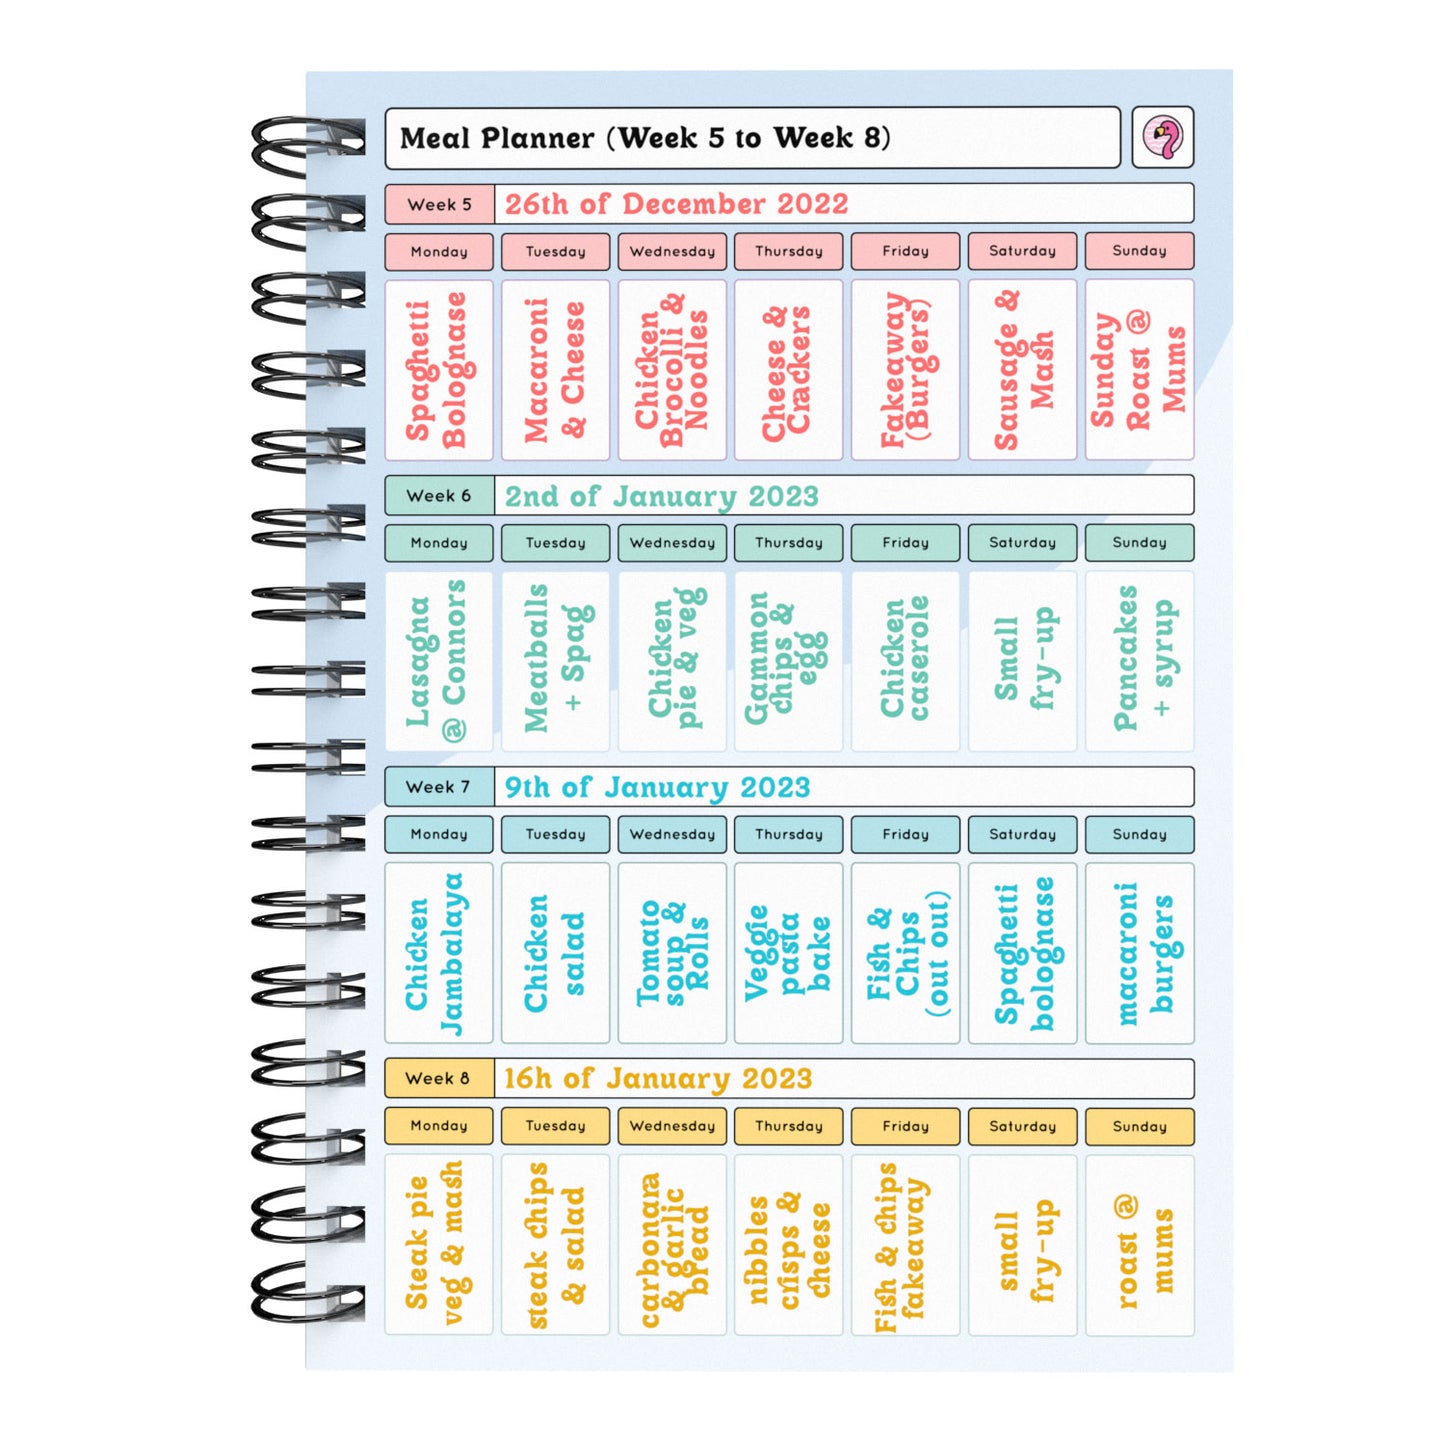 Food Diary - C33 - Calorie Counting